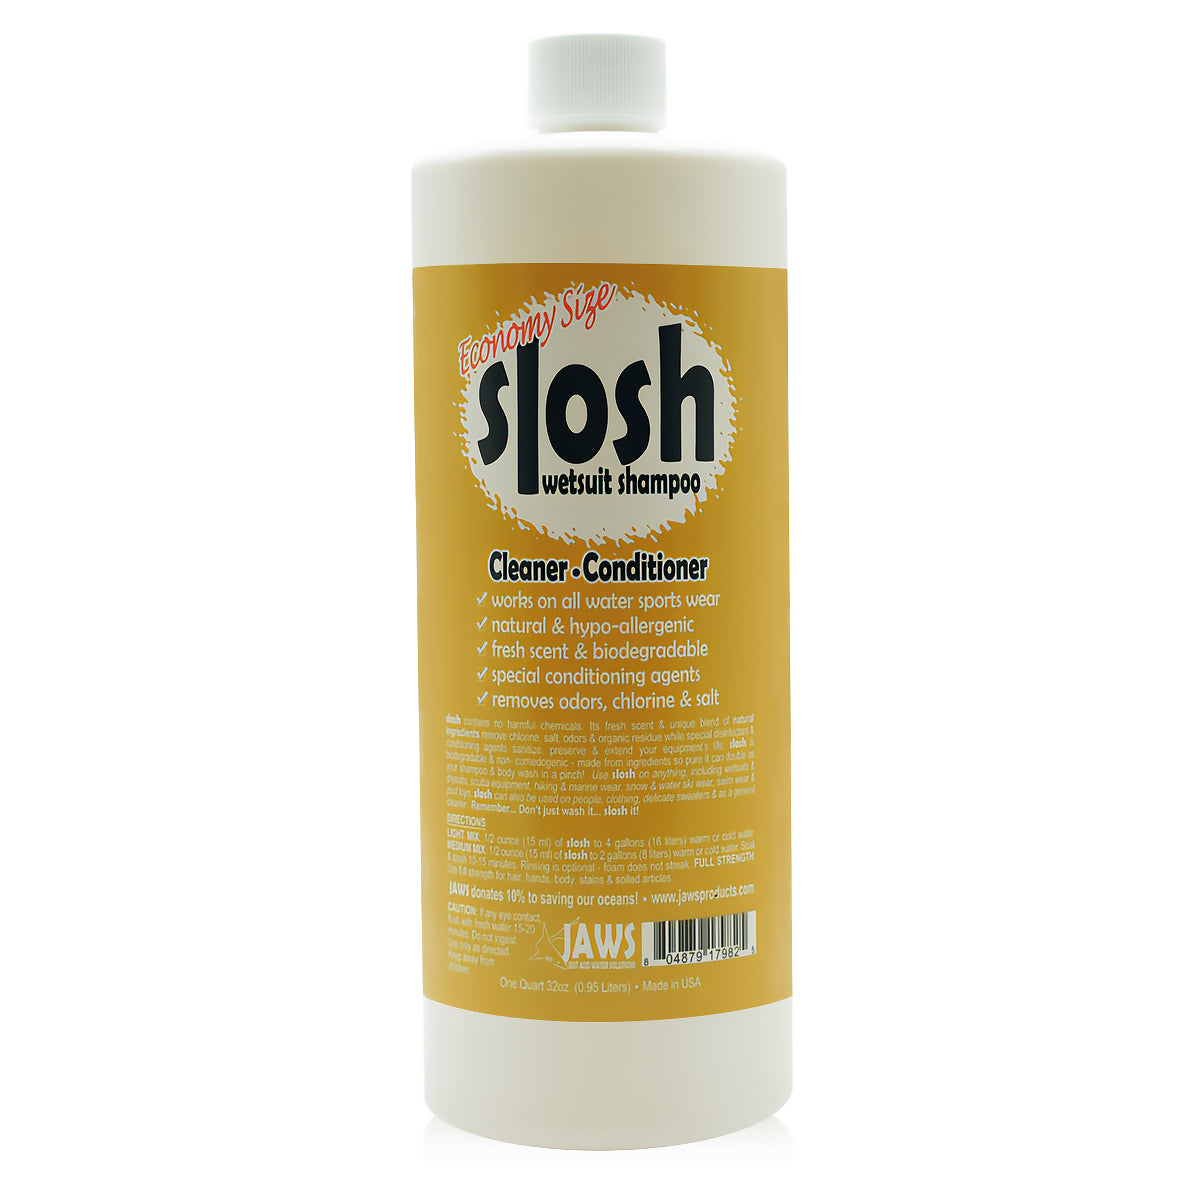 JAWS 32 oz. Slosh Wetsuit Shampoo for Water Sports and Gear JAWS